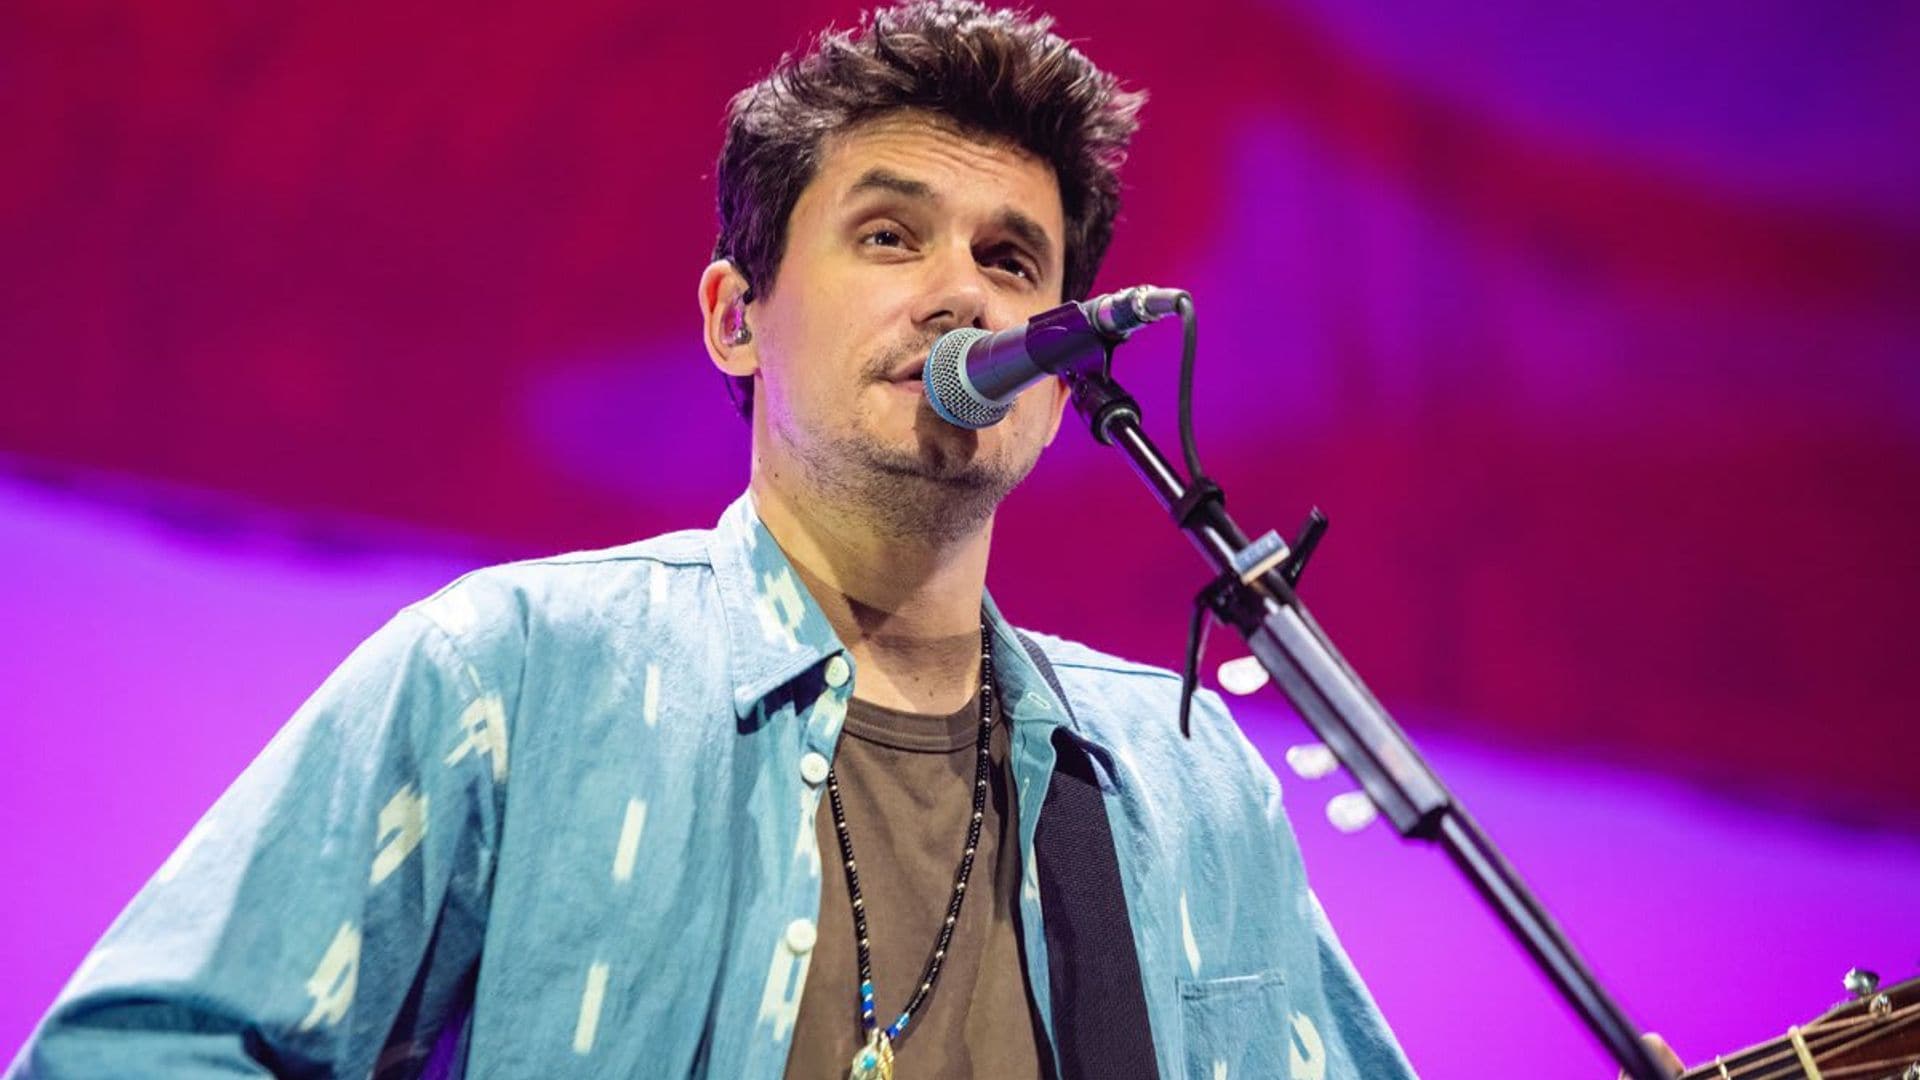 John Mayer reacts to criticism from Taylor Swift fans after joining TikTok